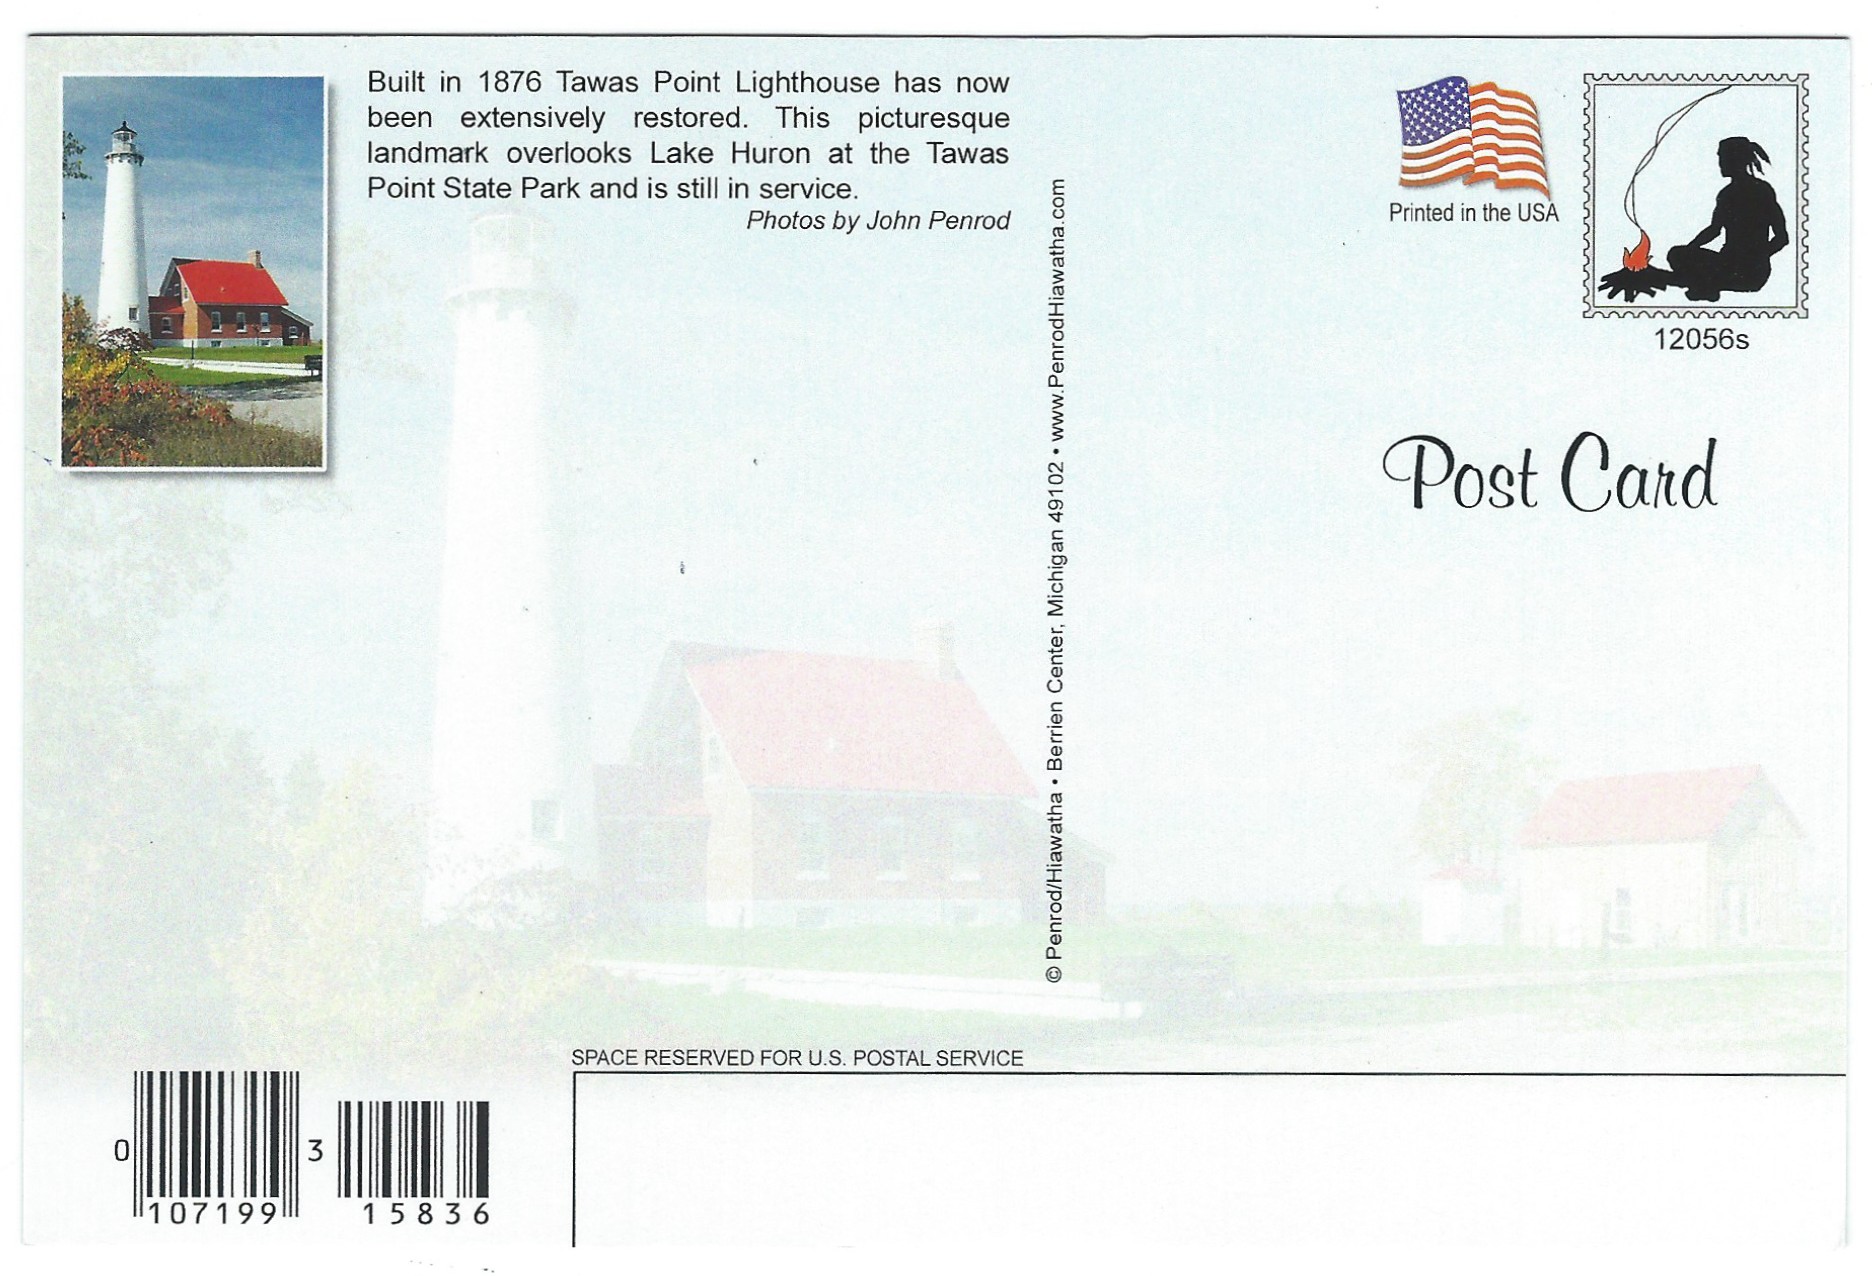 Tawas Point Lighthouse Postcard 12056s (MI) - Click Image to Close